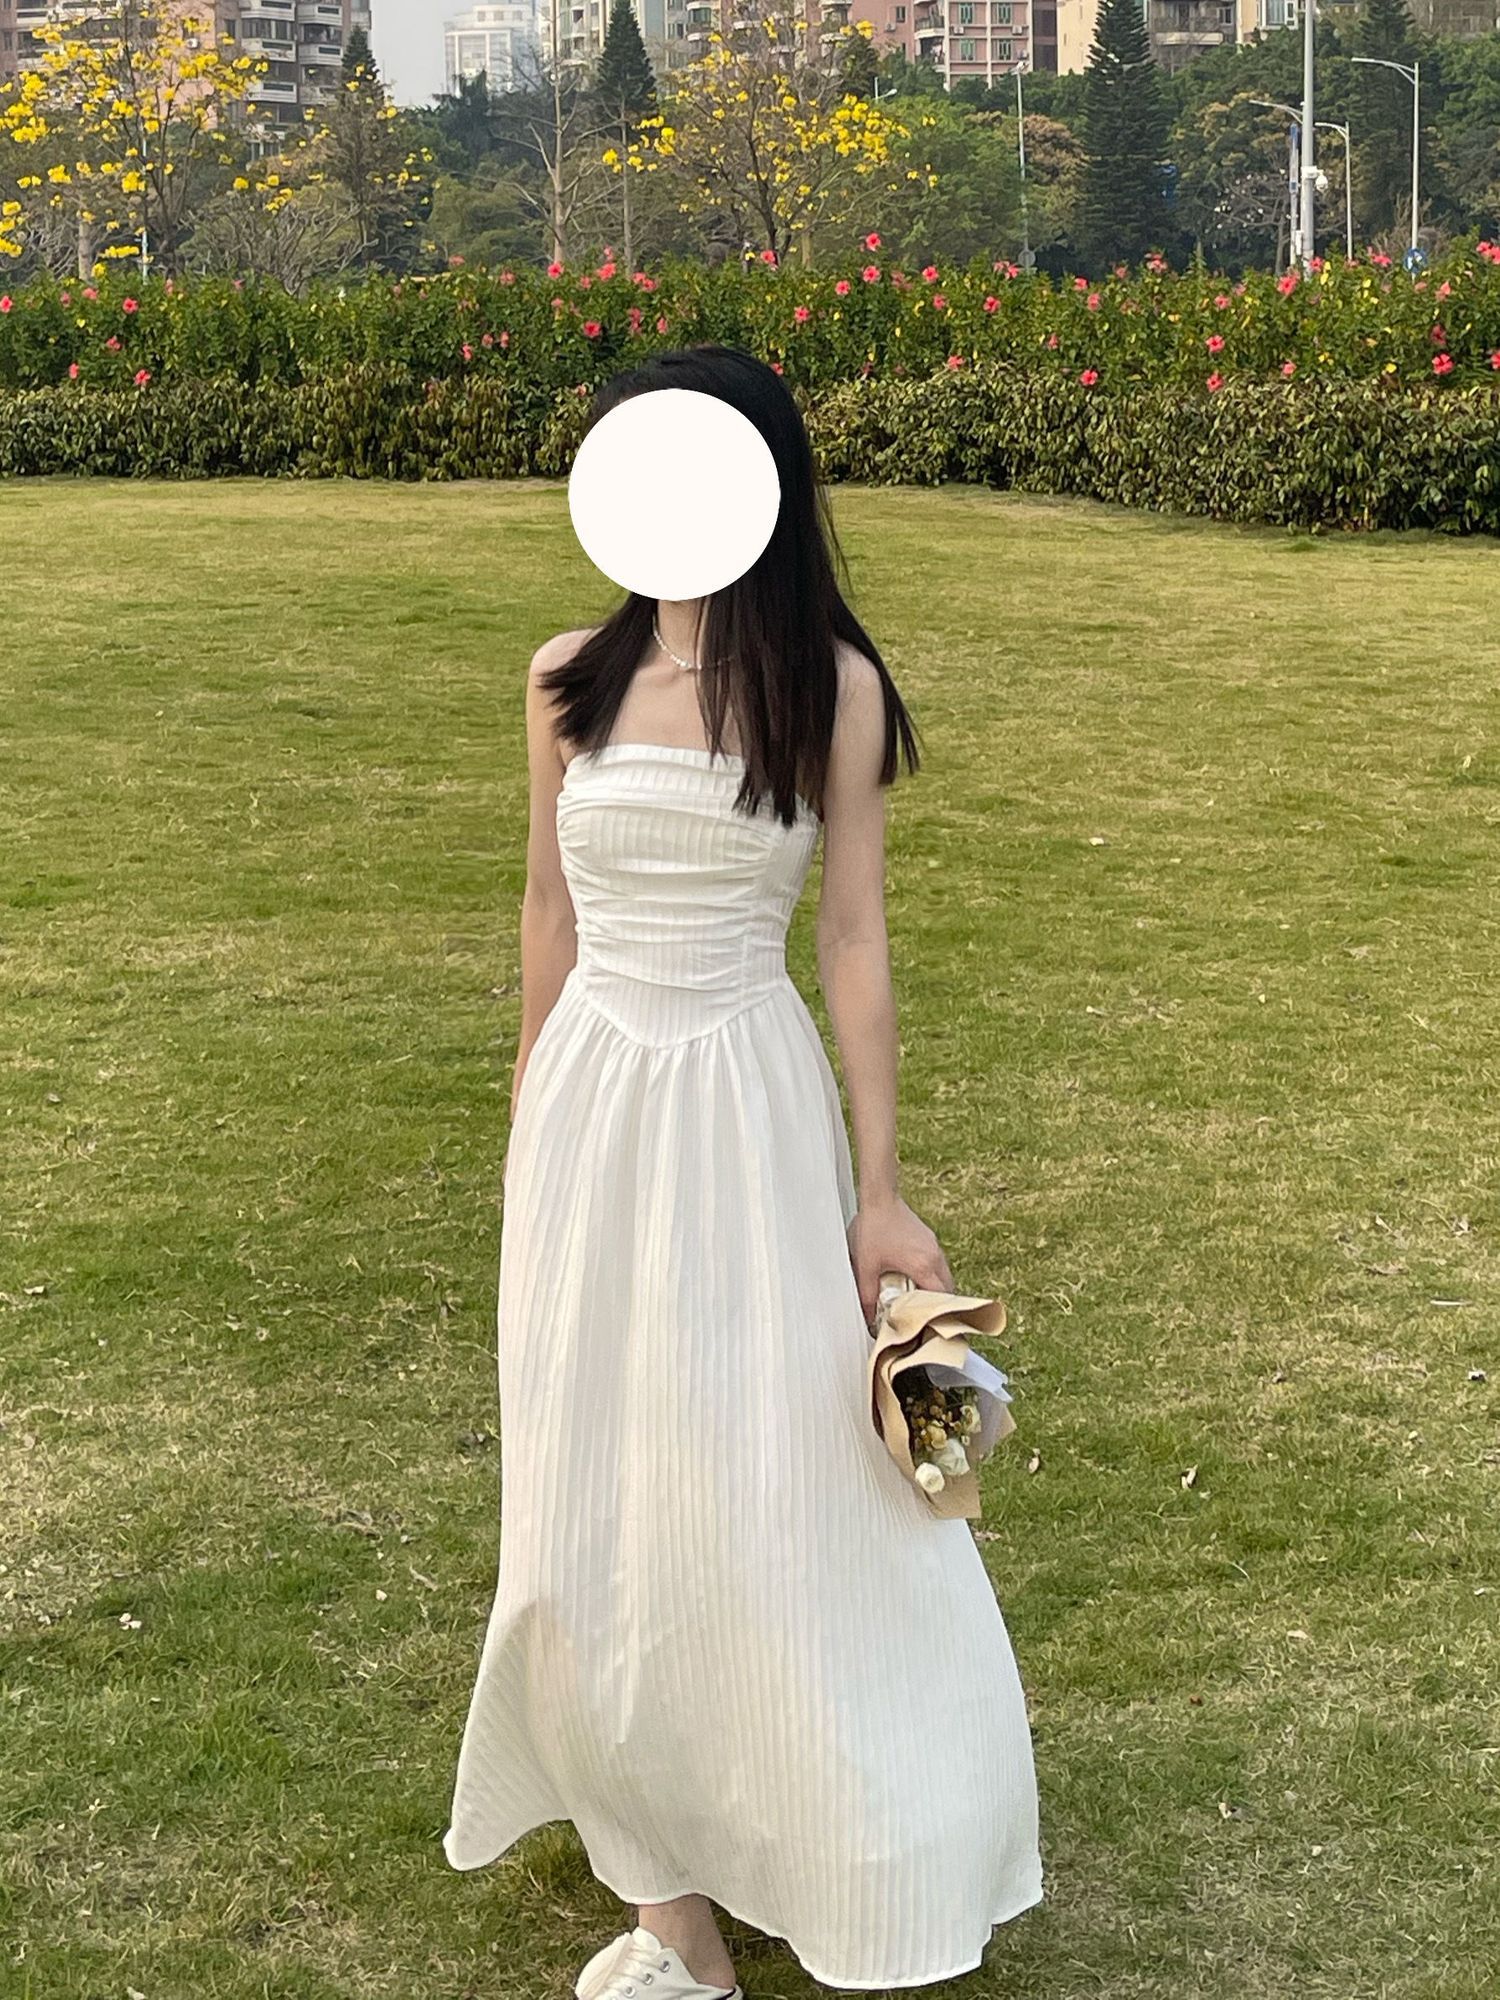 SOLO Explosive Sunset Evening Breeze White Wrapped Breast Dress Women's Spring and Summer Long Tube Top Dress Pure Desire Base Skirt